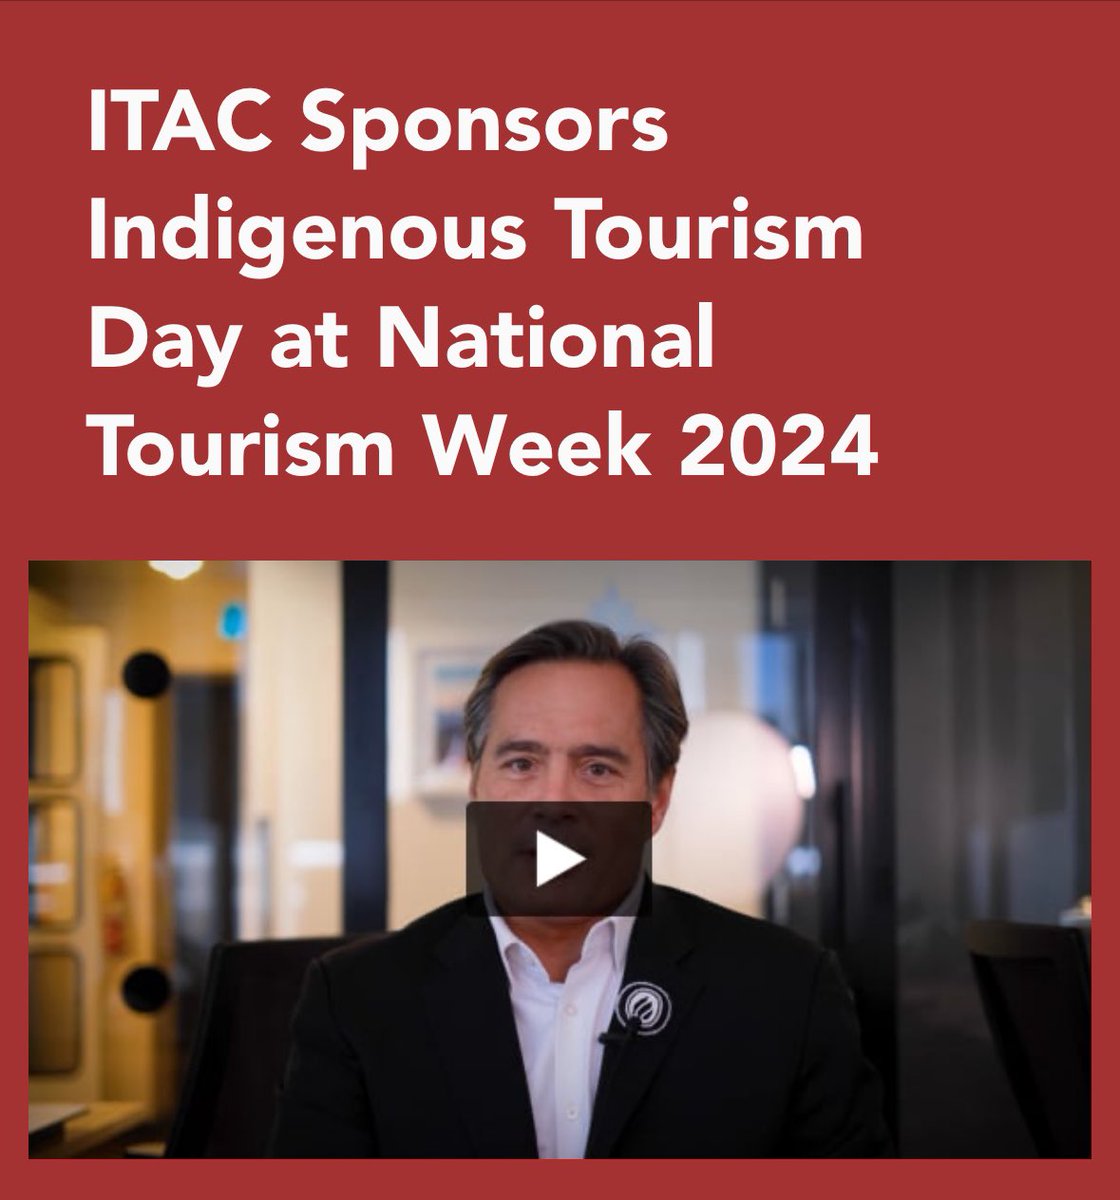 The @ITAC_Corporate is proud to be a sponsor of Indigenous Tourism Day today this Wednesday April 17, 2024, part of the @TIAC_AITC National Tourism Week 2024 'Indigenous tourism’s contribution to the economy is crucial, fostering sustainable growth while preserving and…